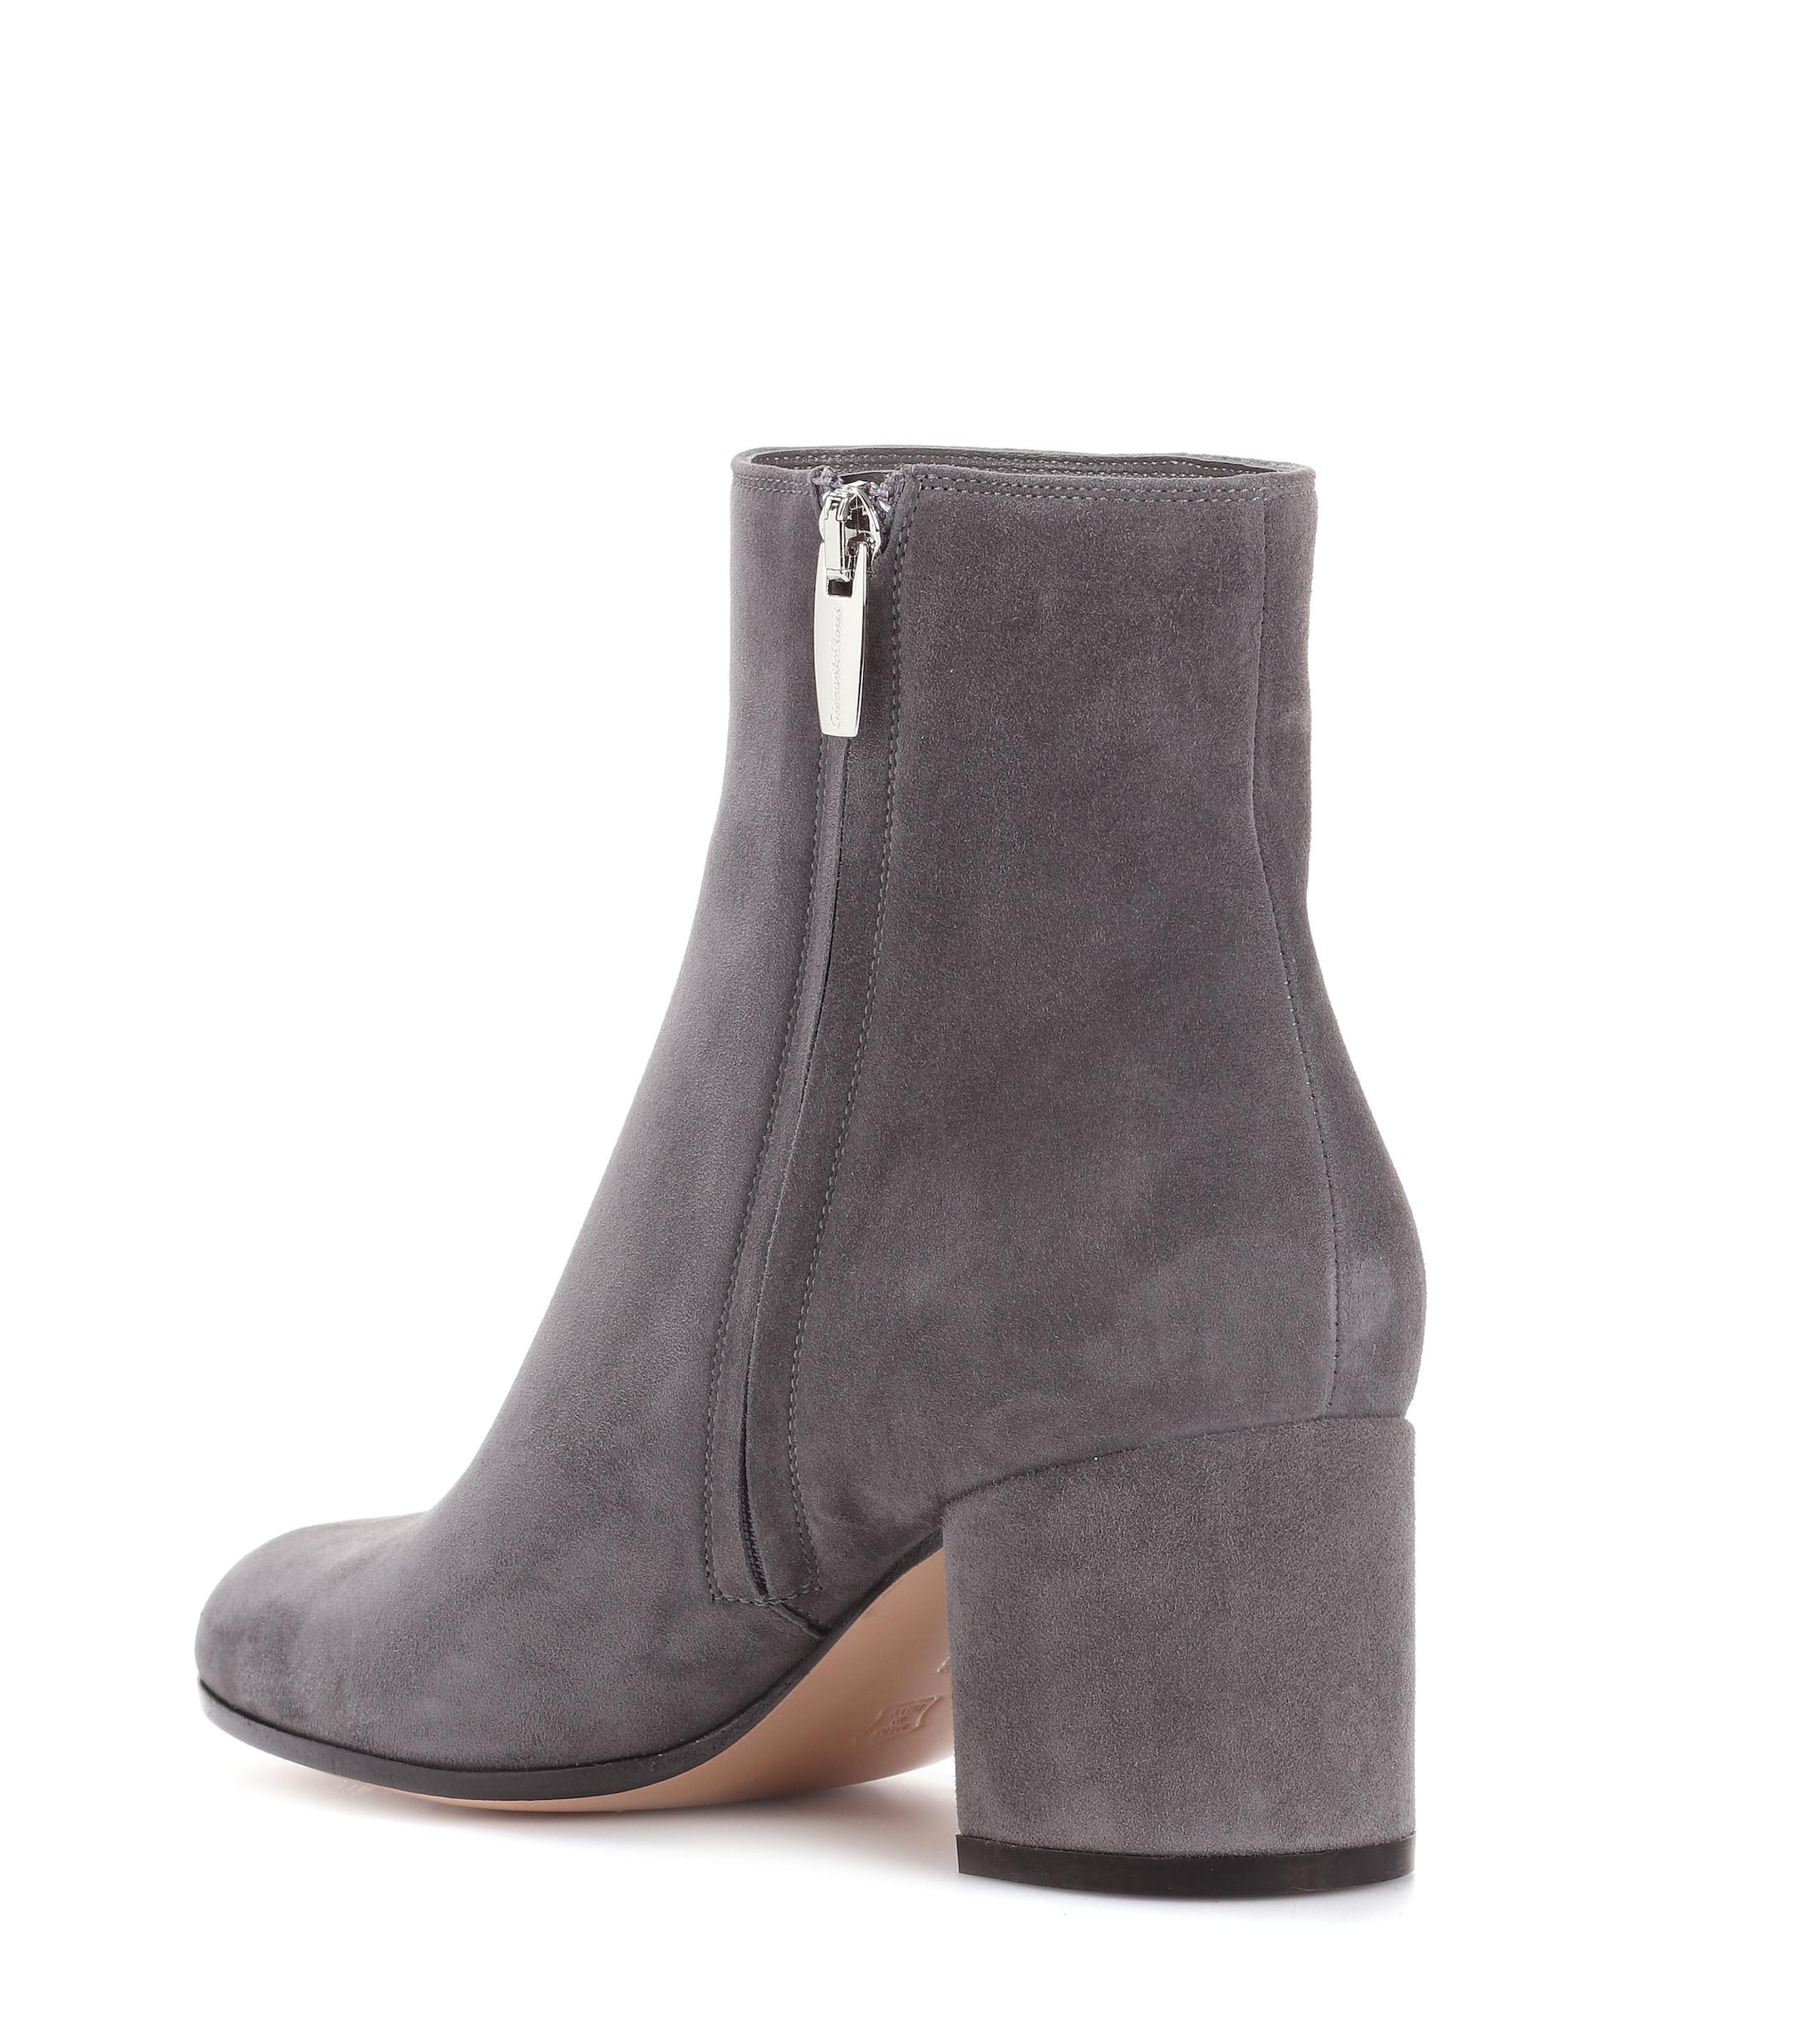 Gianvito Rossi Margaux Mid Suede Ankle Boots in Grey (Gray) - Save 39% ...